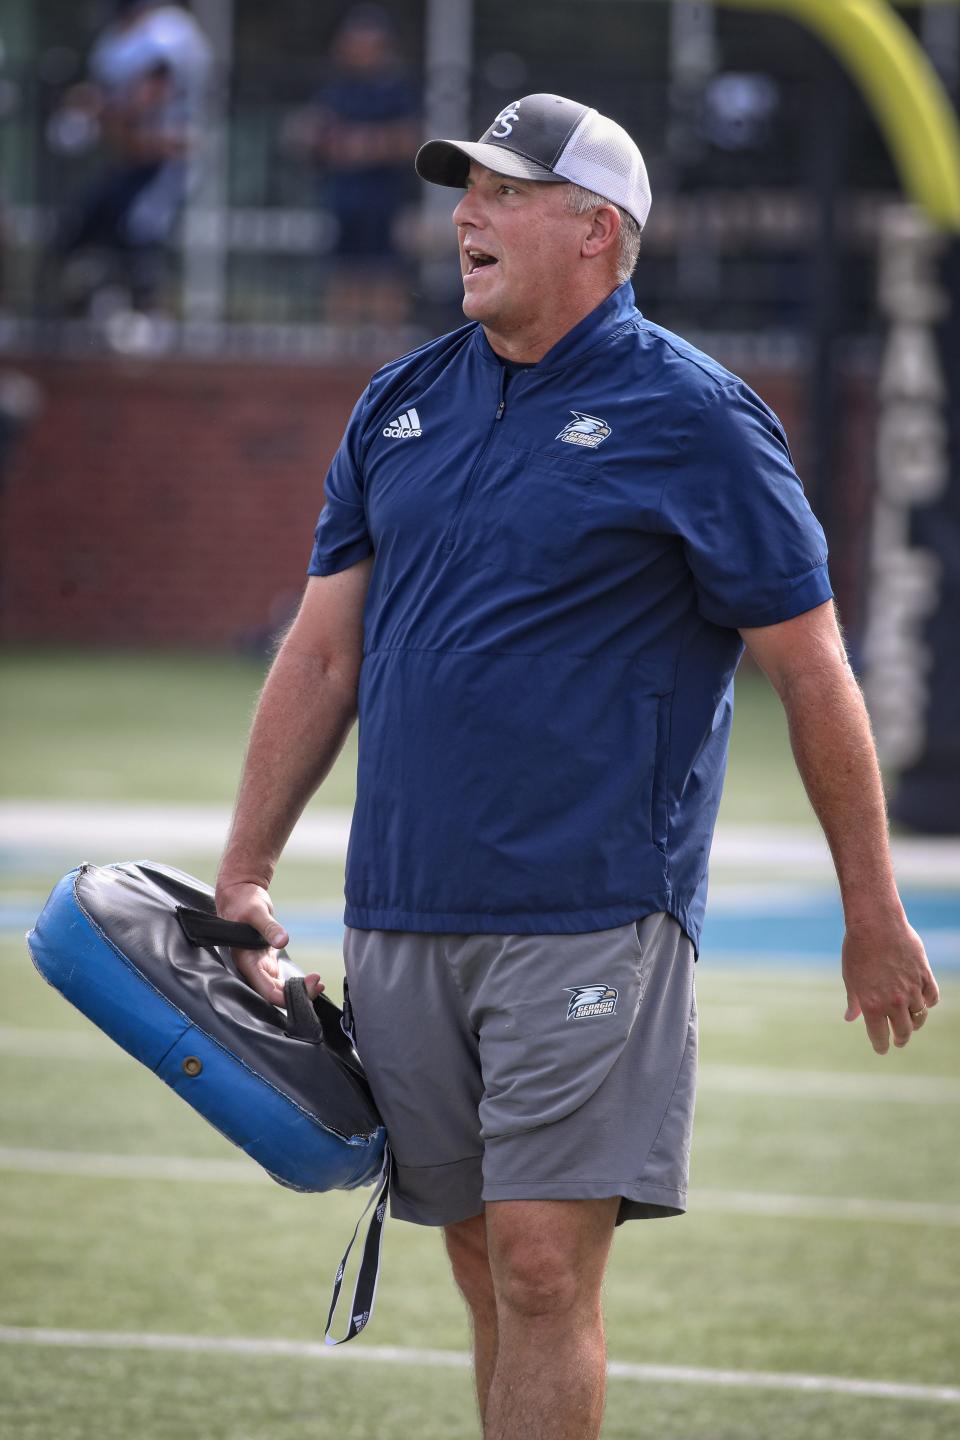 Georgia Southern's new head football coach Clay Helton leads the first practice of the fall on Aug. 3, 2022 at Paulson Stadium in Statesboro.